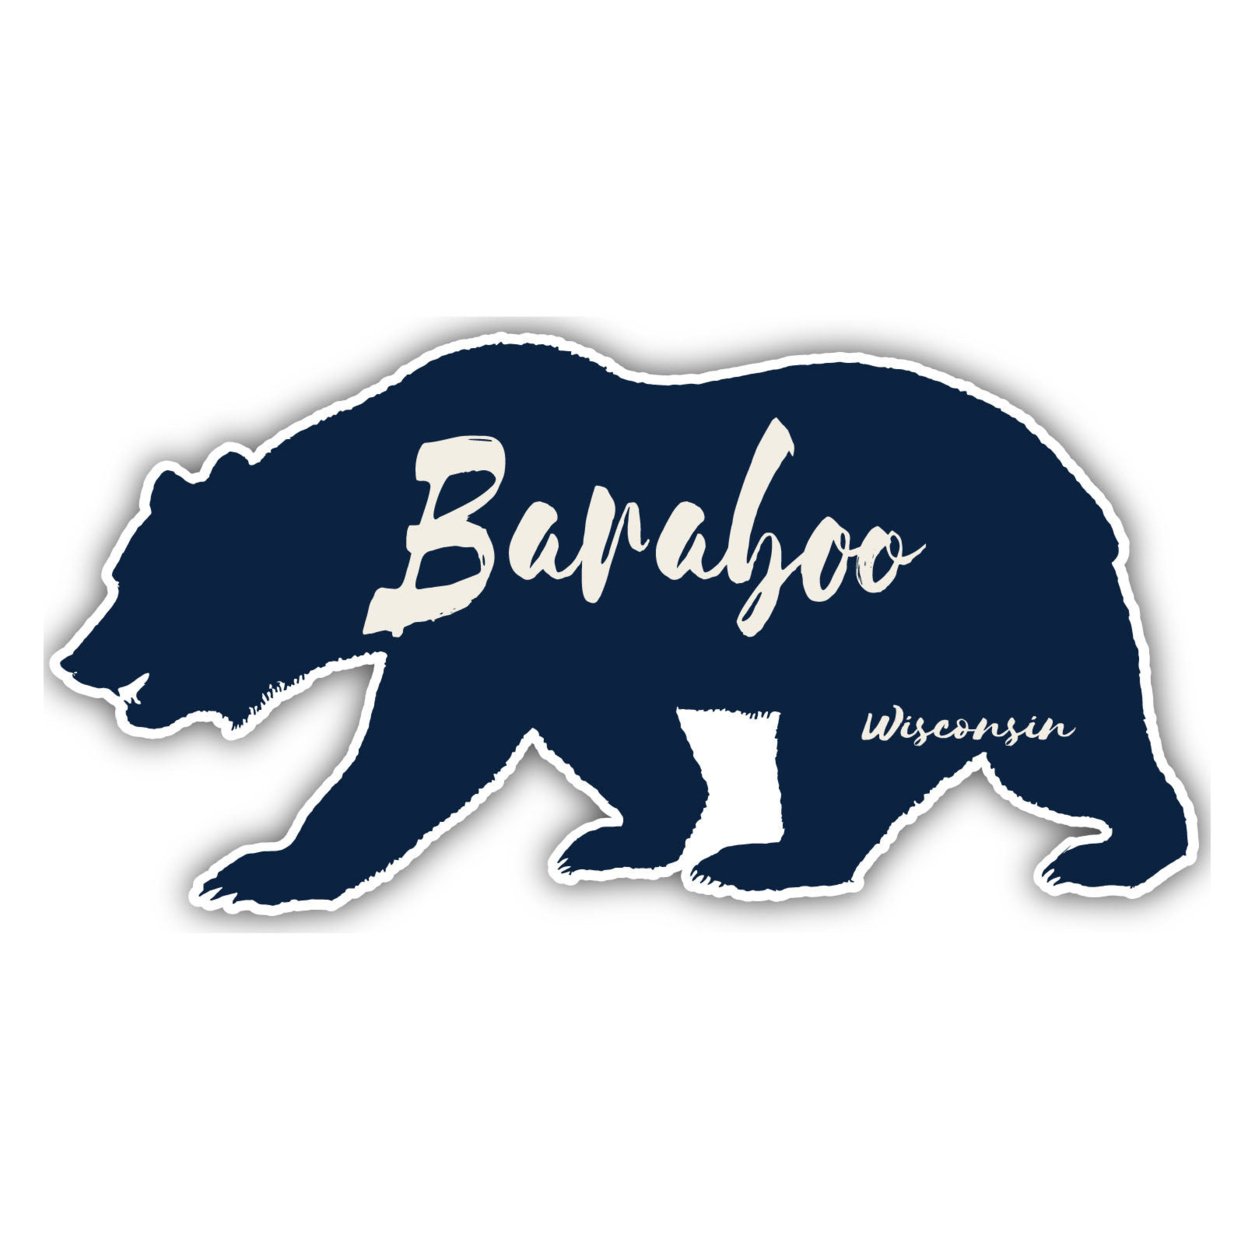 Baraboo Wisconsin Souvenir Decorative Stickers (Choose Theme And Size) - 4-Pack, 10-Inch, Bear